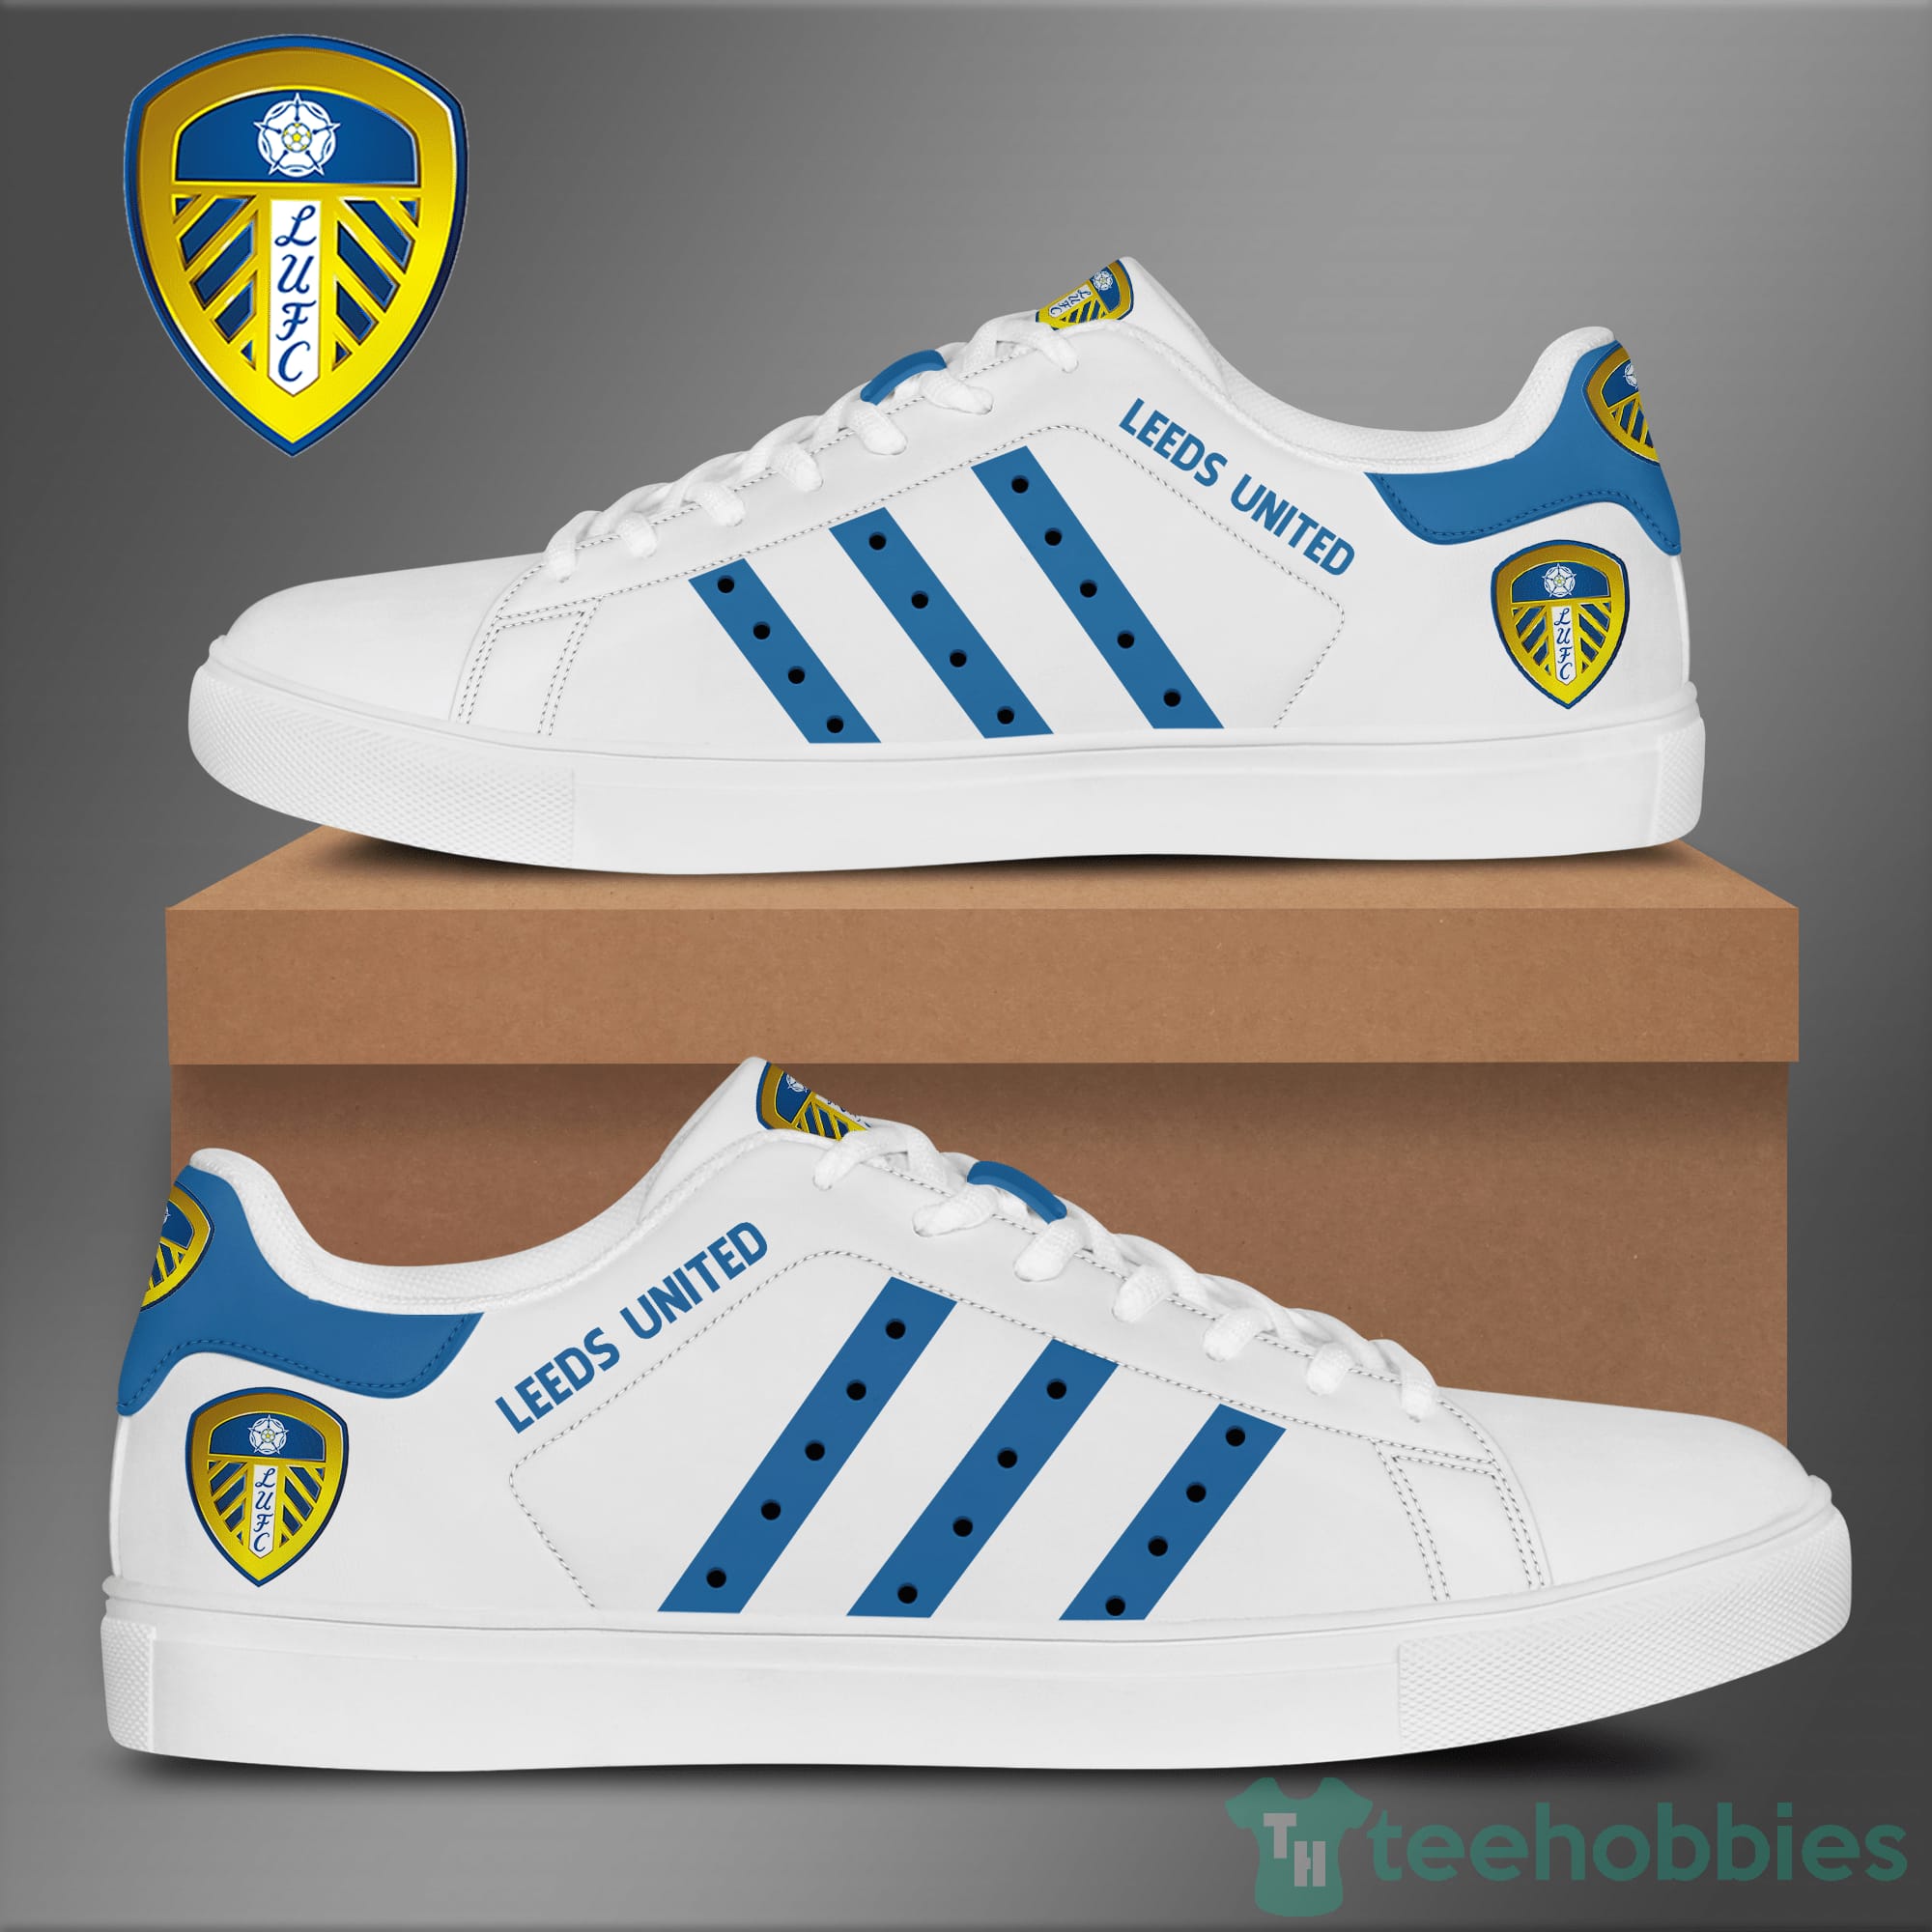 Leeds United F.C White Low Top Skate Shoes Product photo 1